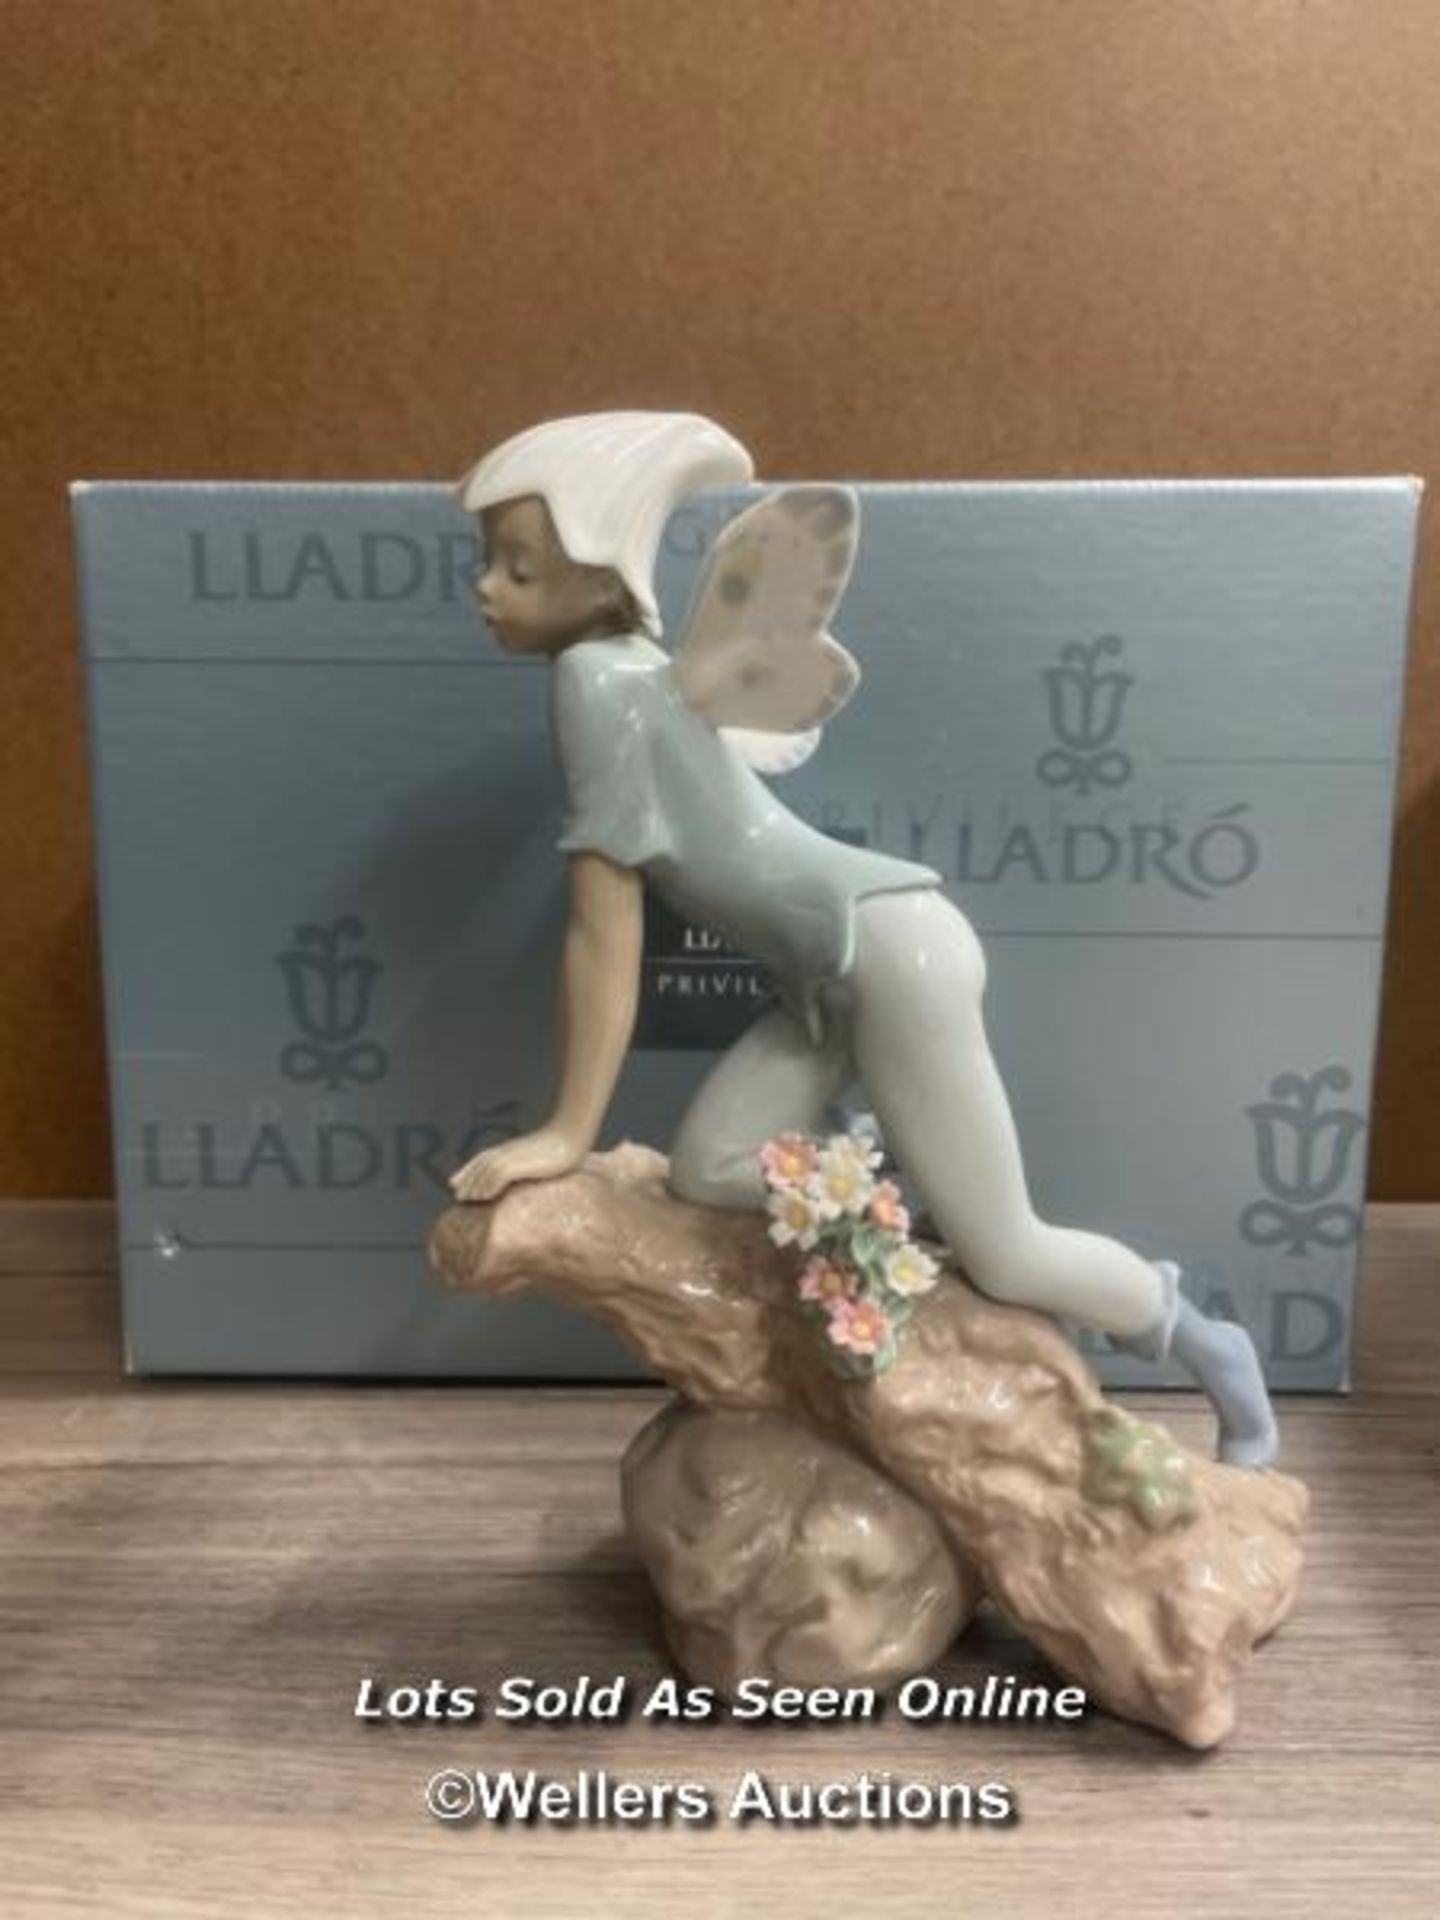 LLADRO PRIVILEGE COLLECTION "PRINCE OF THE ELVES" NO.07690, BOXED